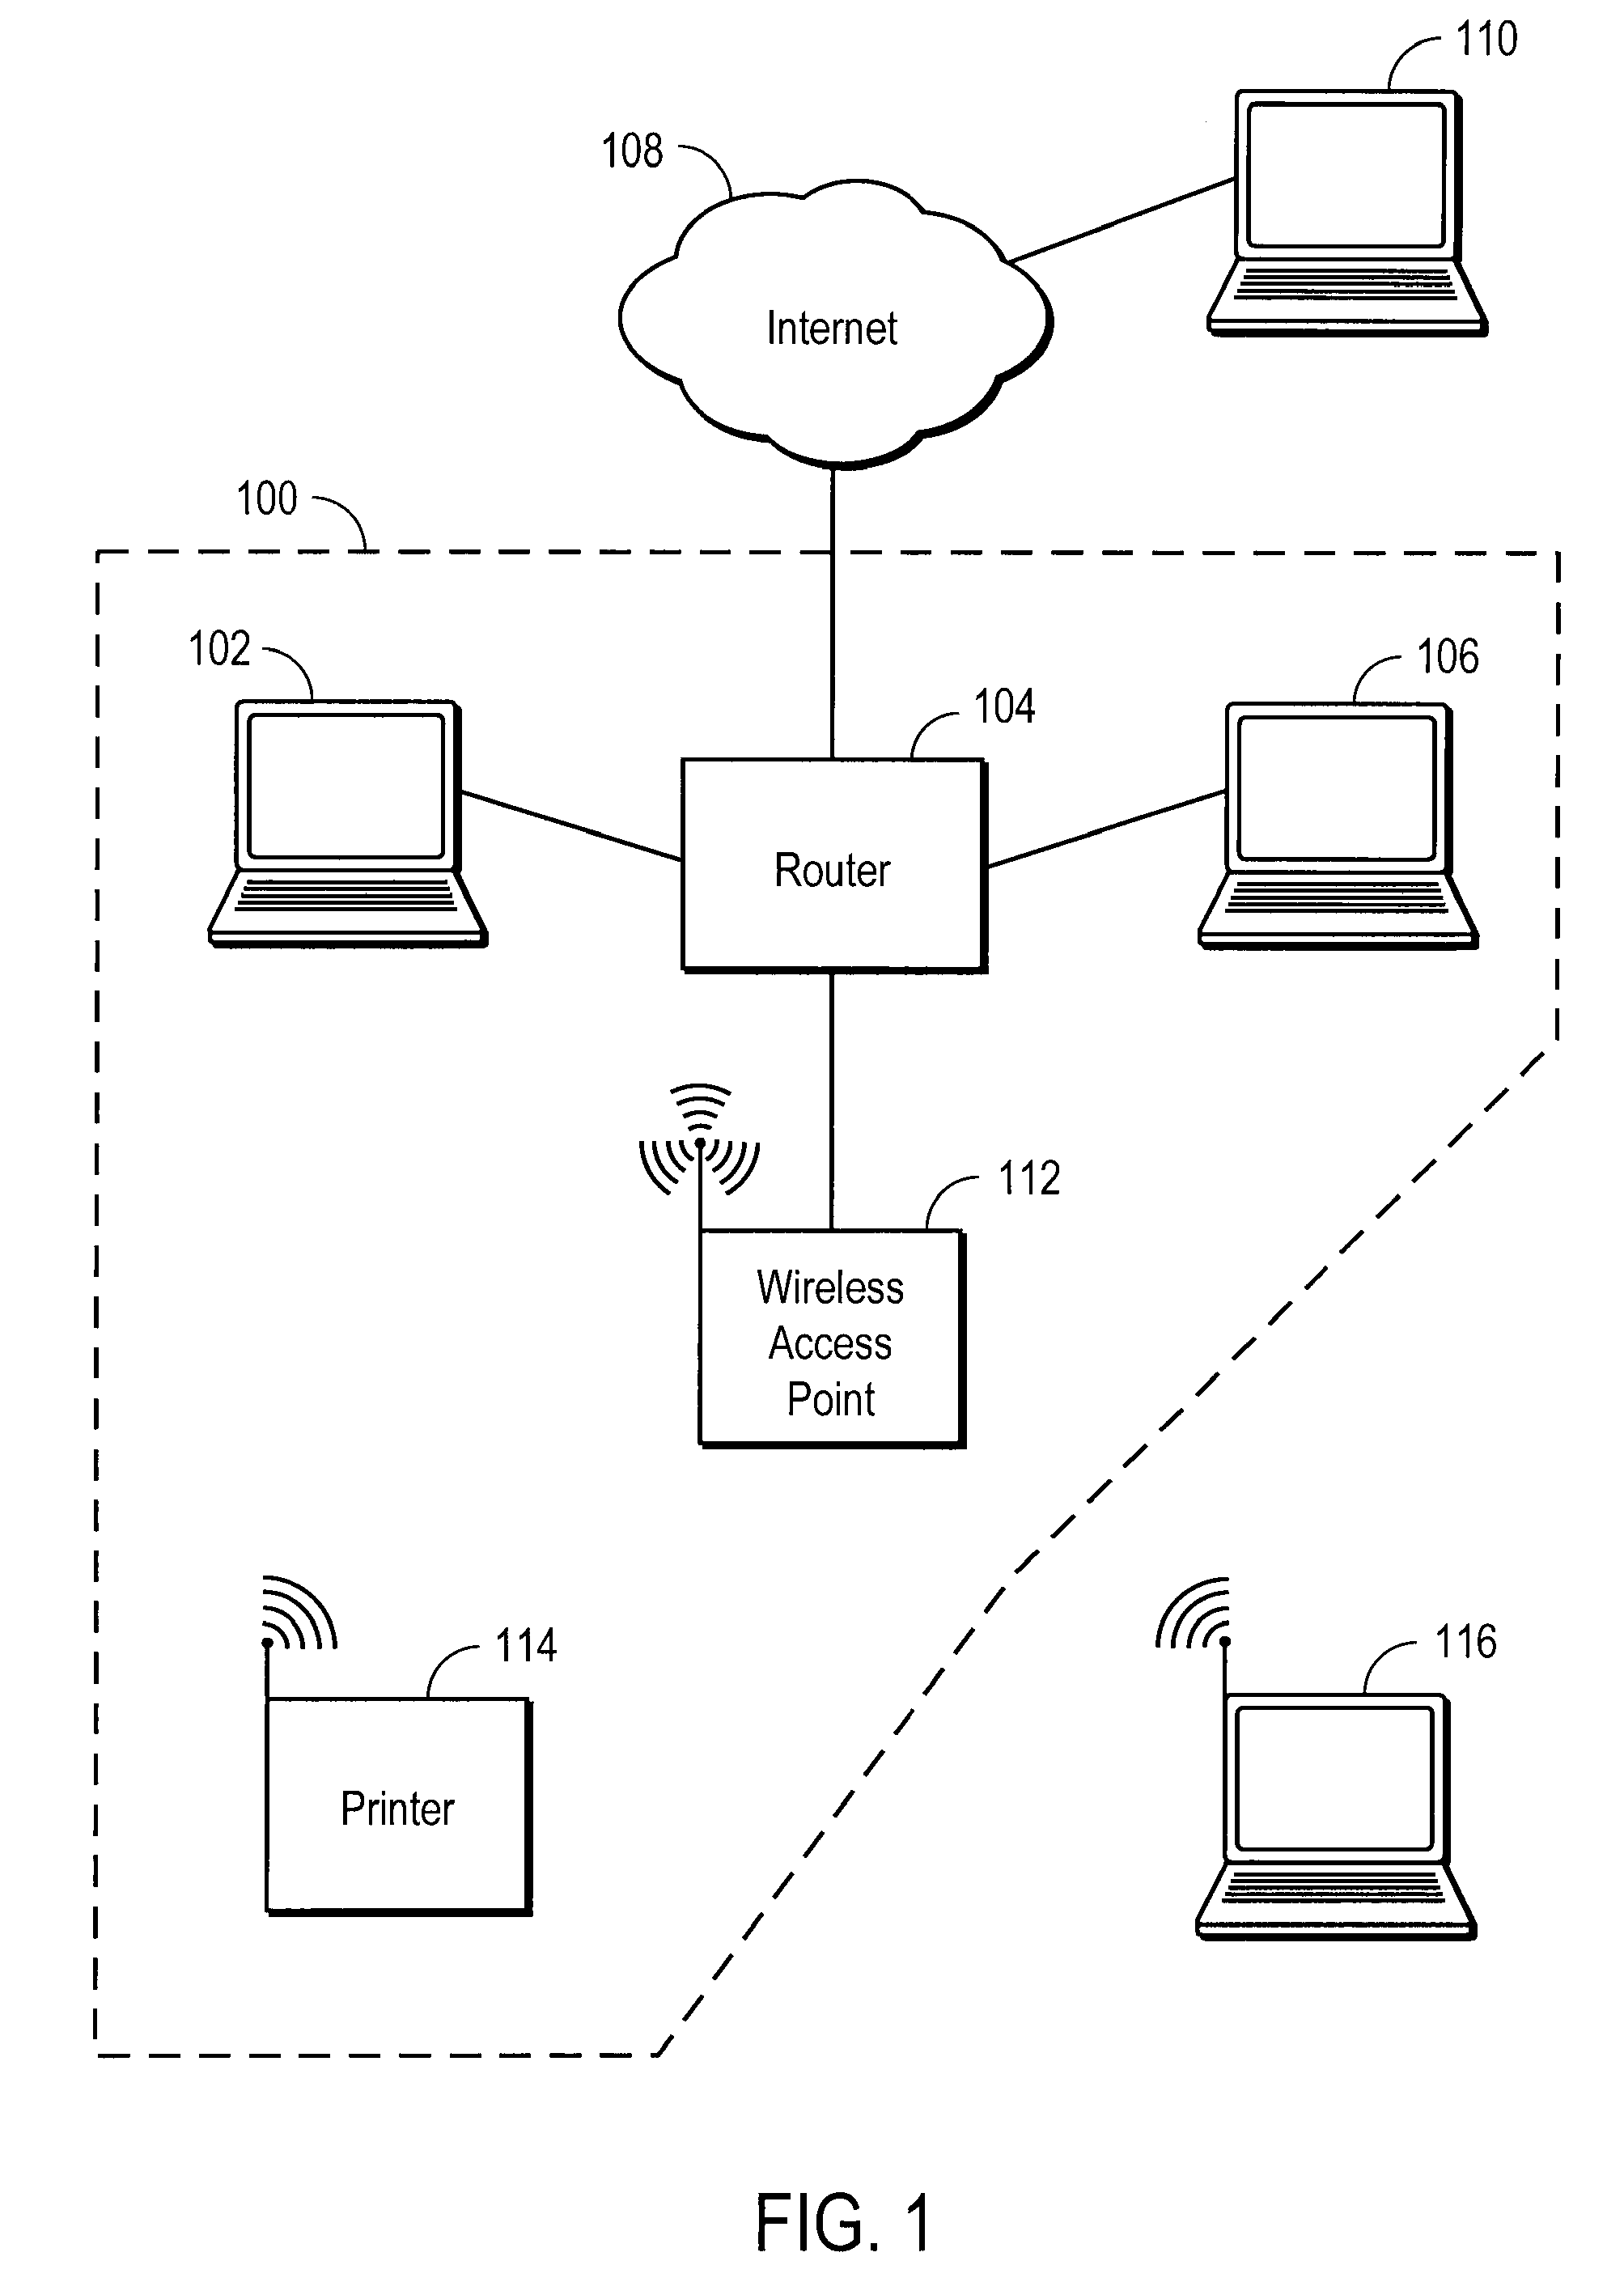 Simplified configuration and security for networked wireless devices